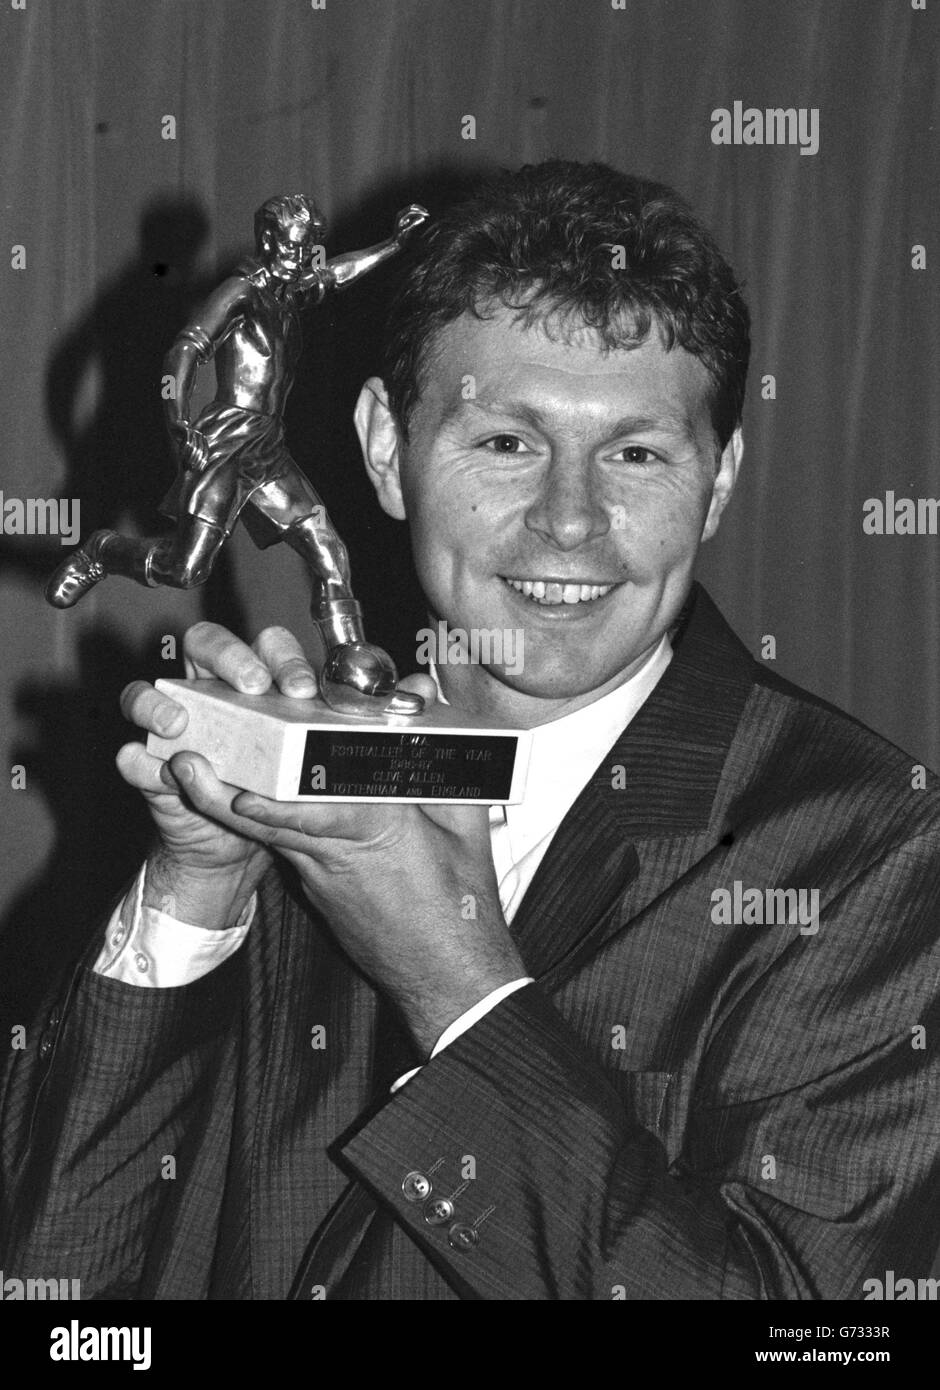 Clive Allen - Footballer of the Year Stock Photo